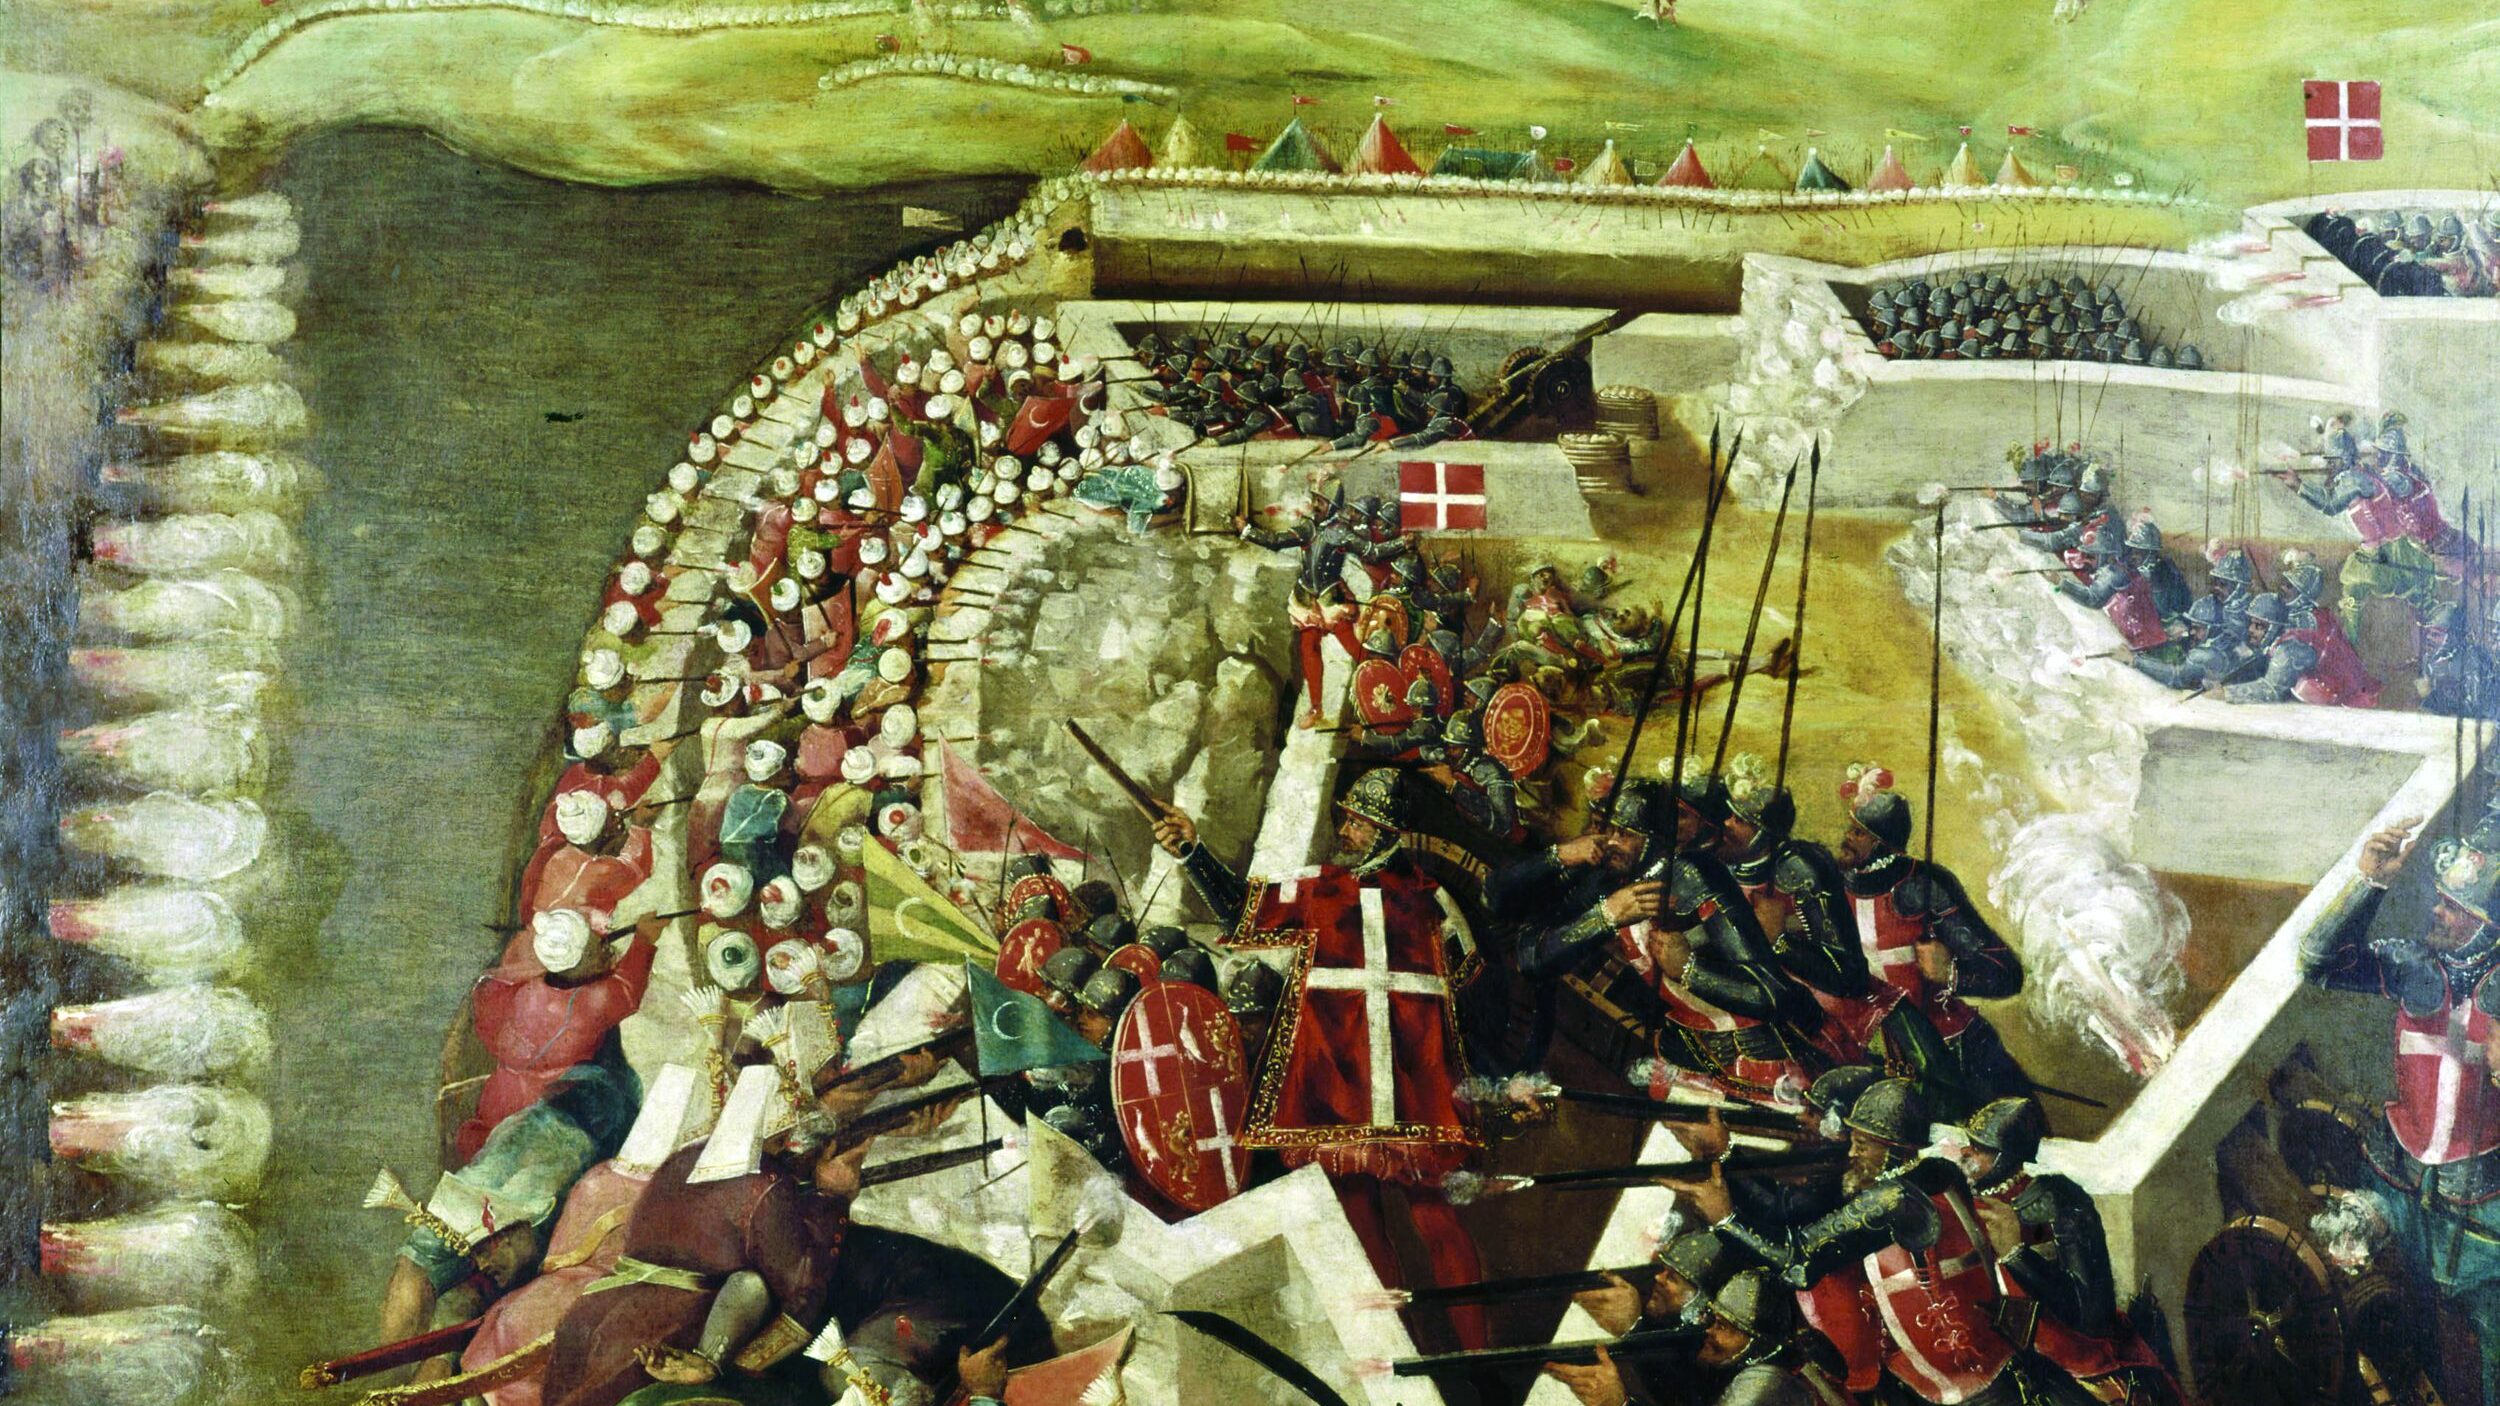 Vizier Mustafa Pasha commanded the Turkish ground forces at Malta, seen here breasting the Knights Hospitallers in one of numerous headlong assaults.